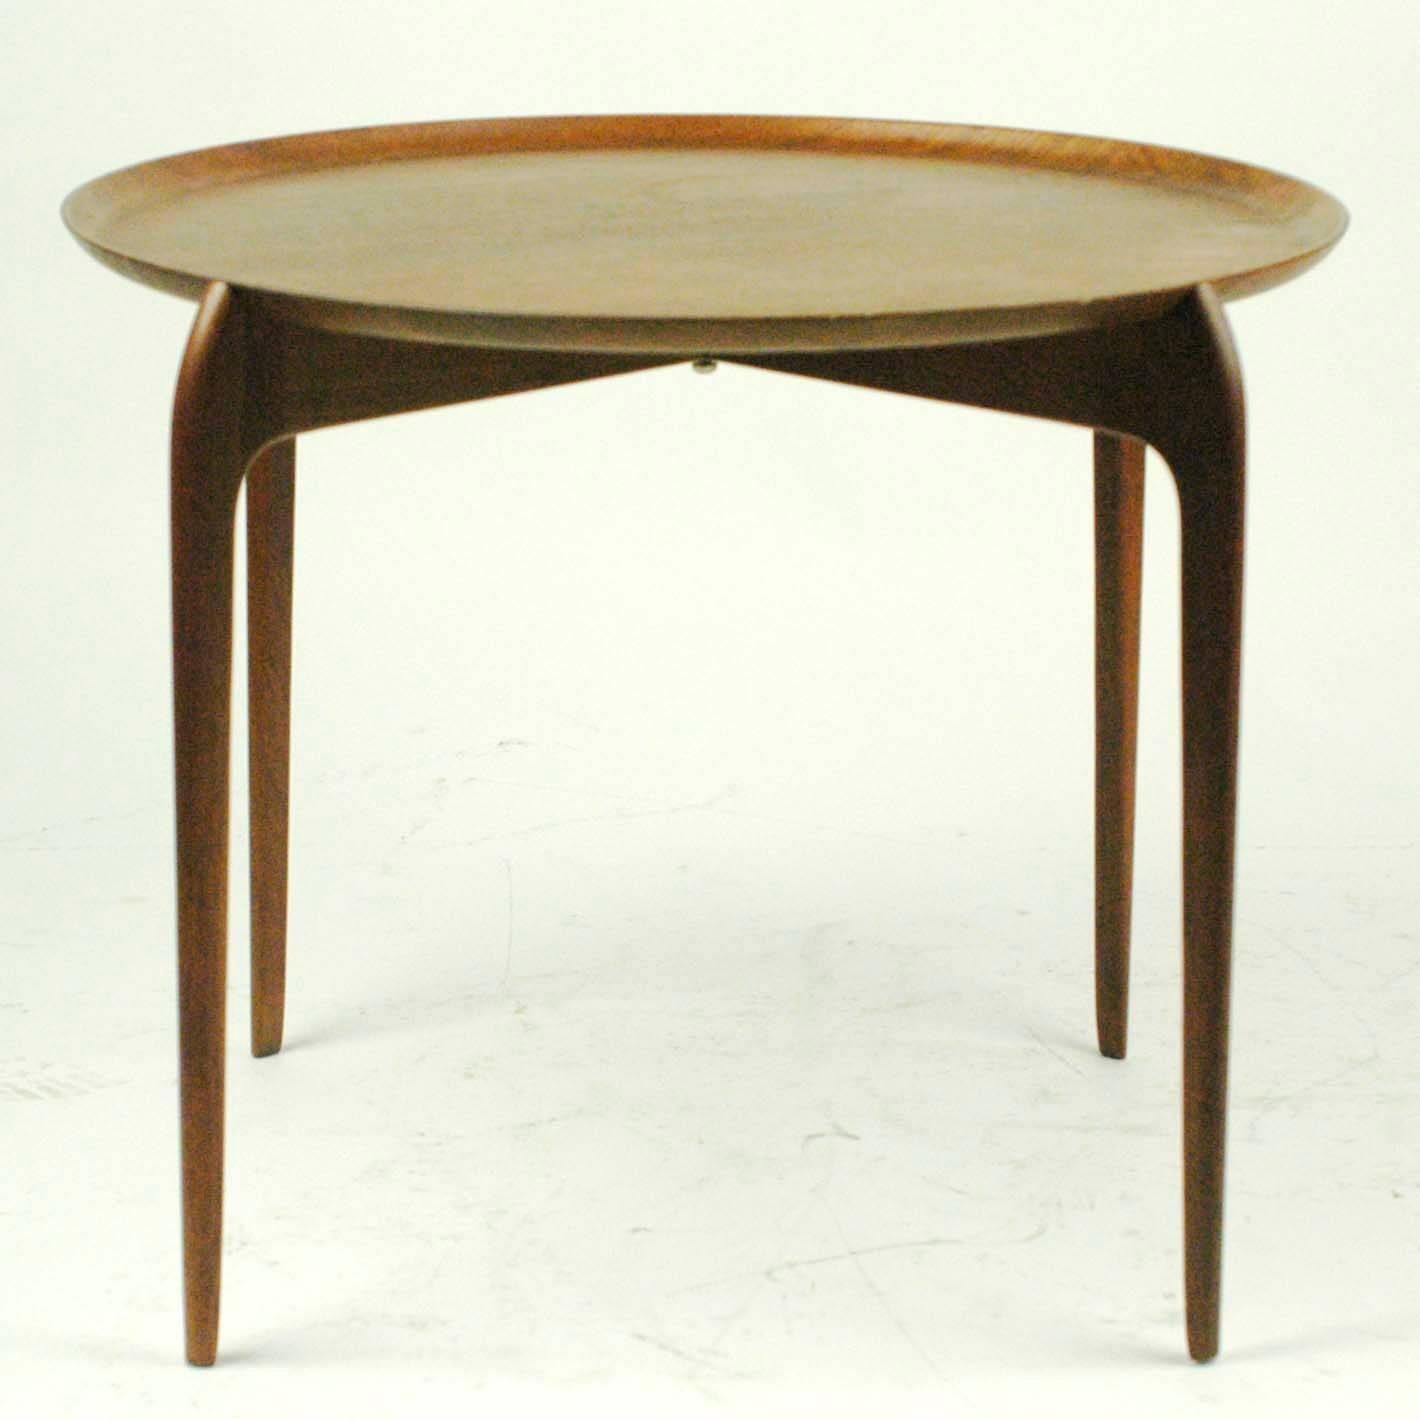 Scandinavian Modern Danish Modern Teak Tray Table in the Style of Willumsen and Engholm